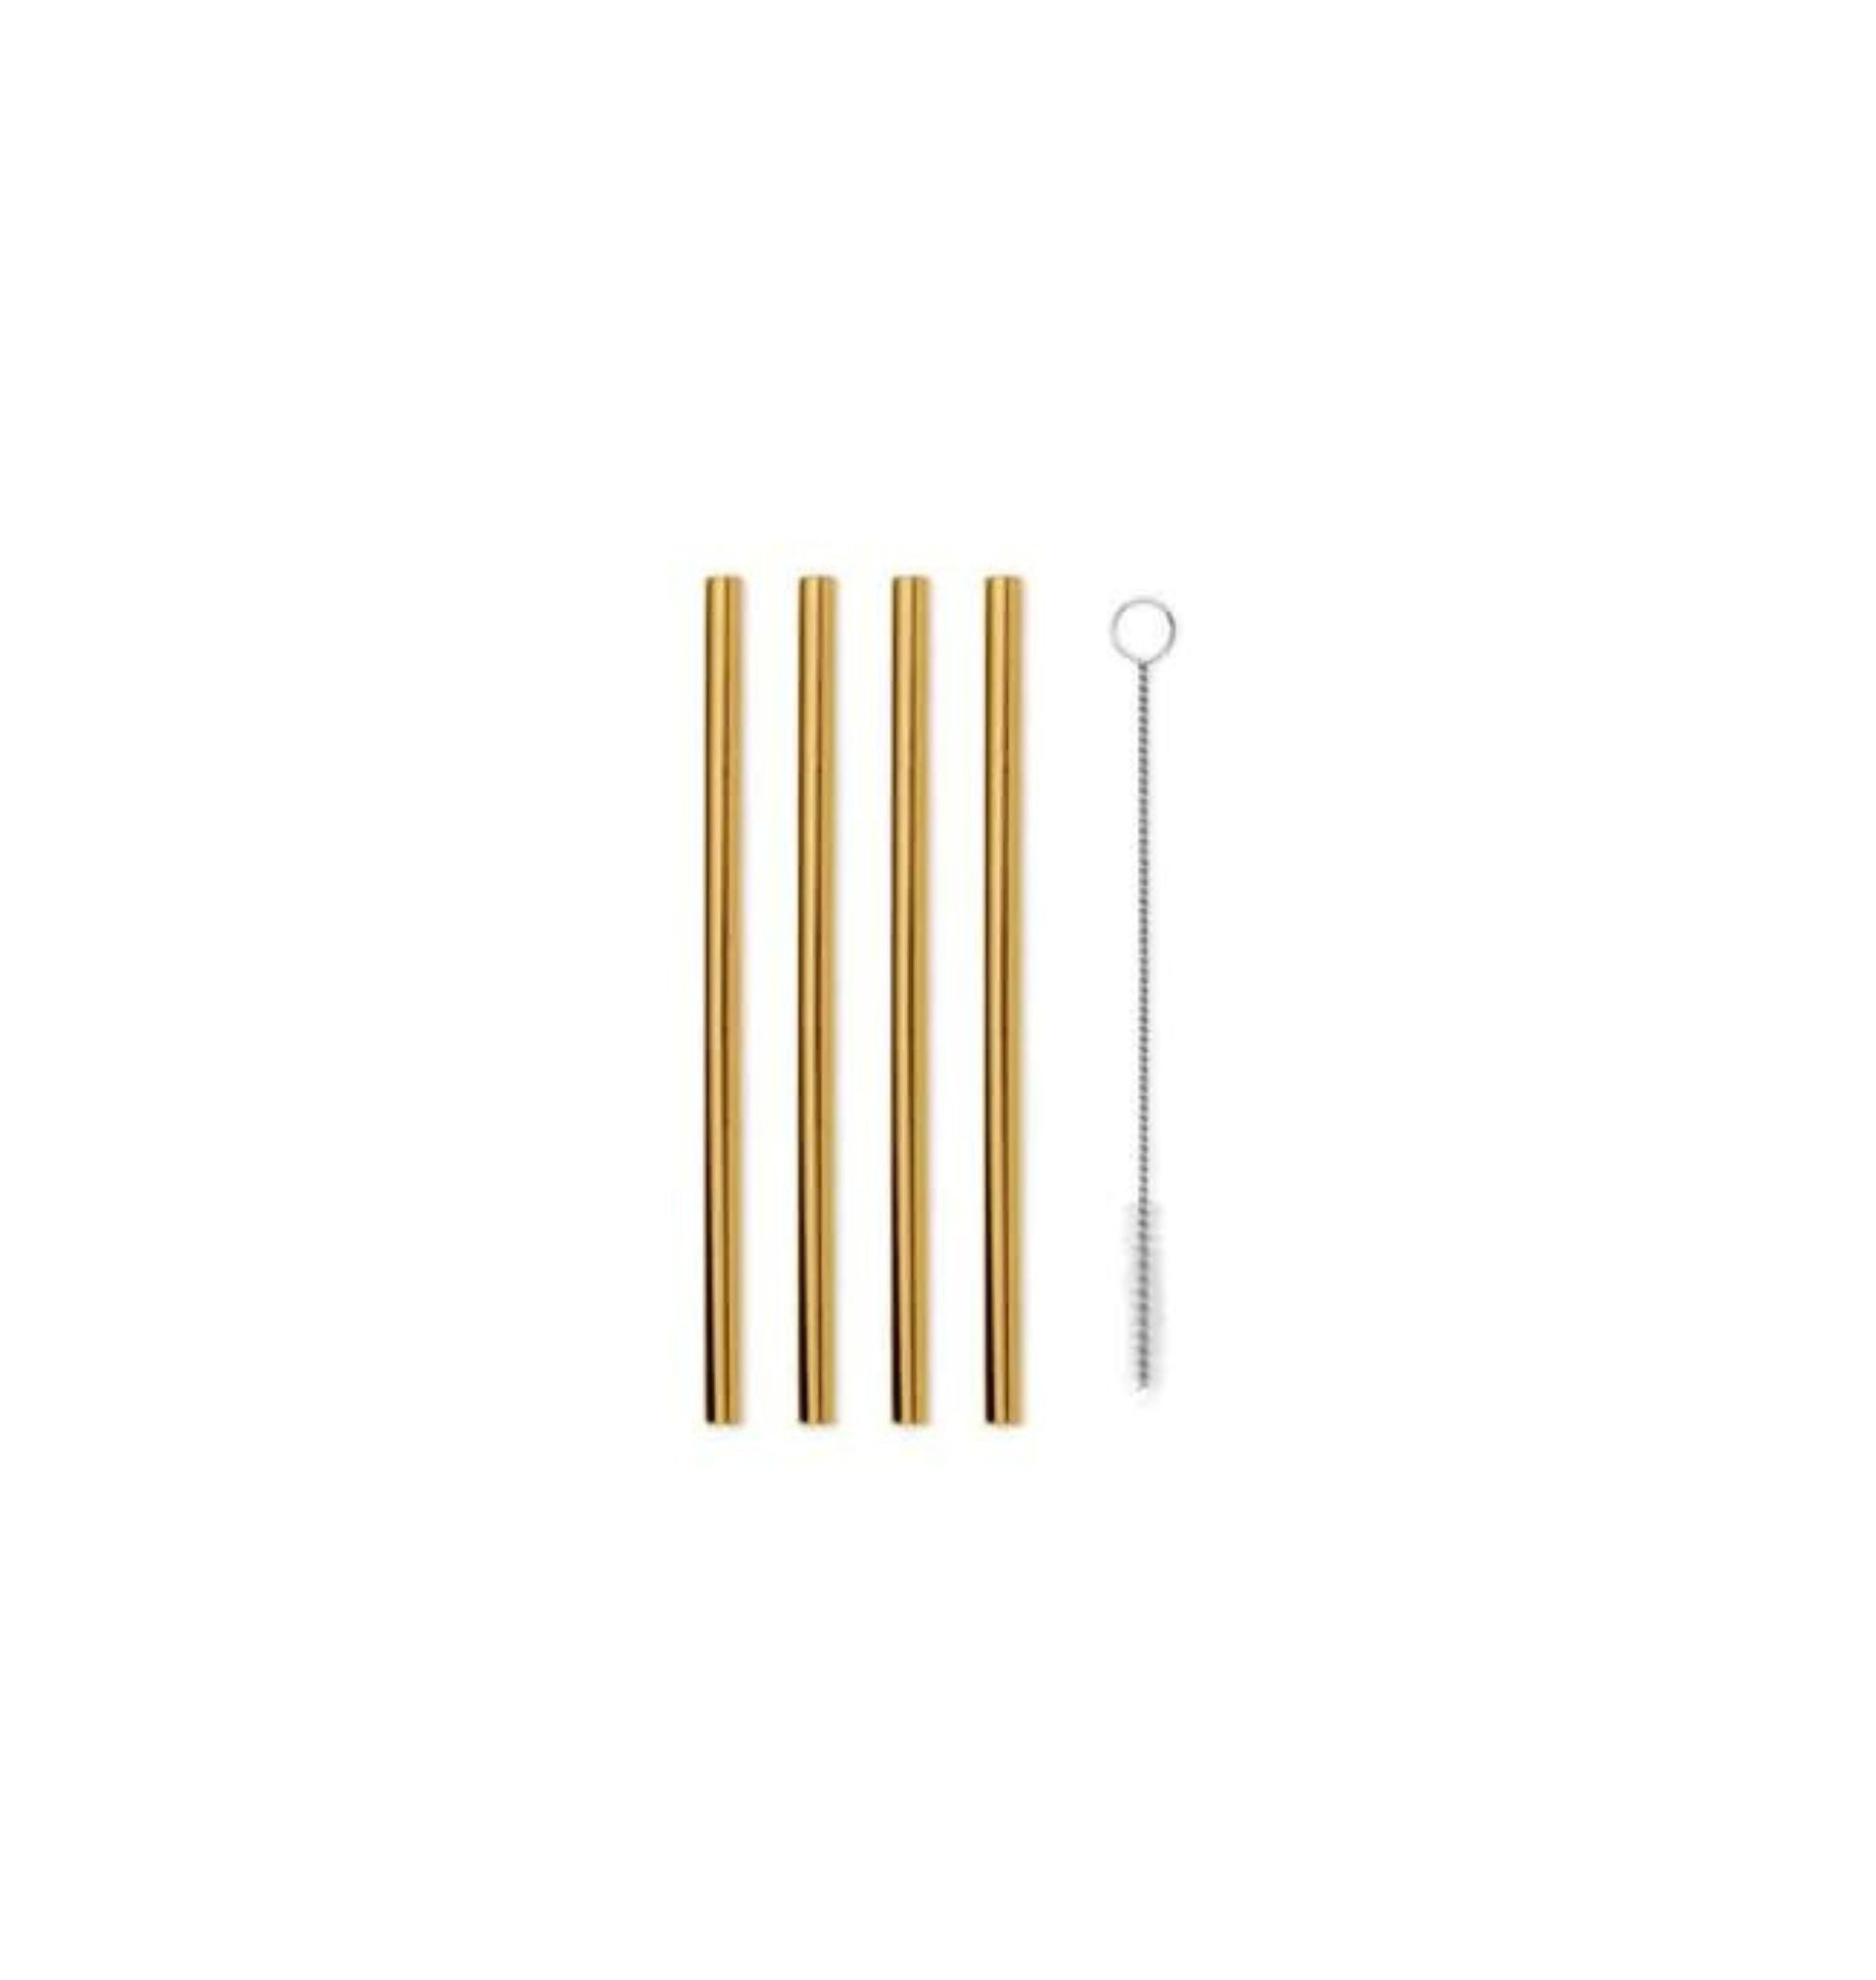 Porter 5in Metal Straws, Set of 4 with Cleaner